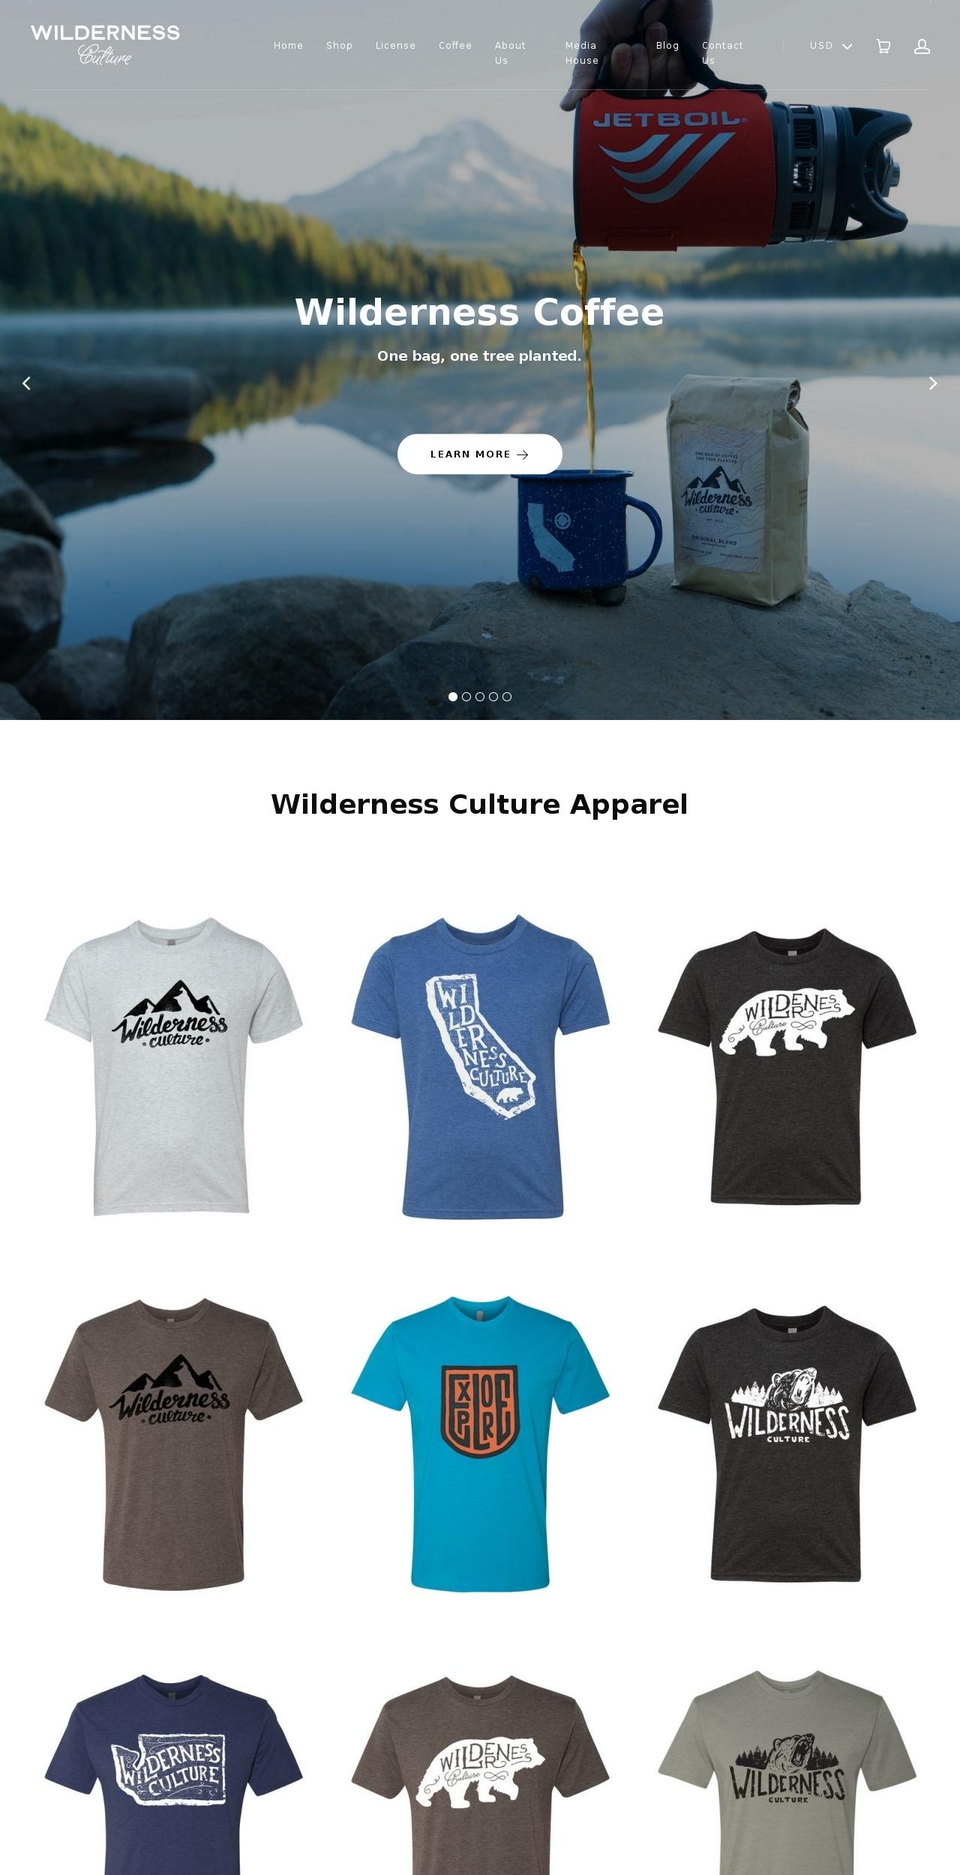 Story Shopify theme site example wildernessculture.com